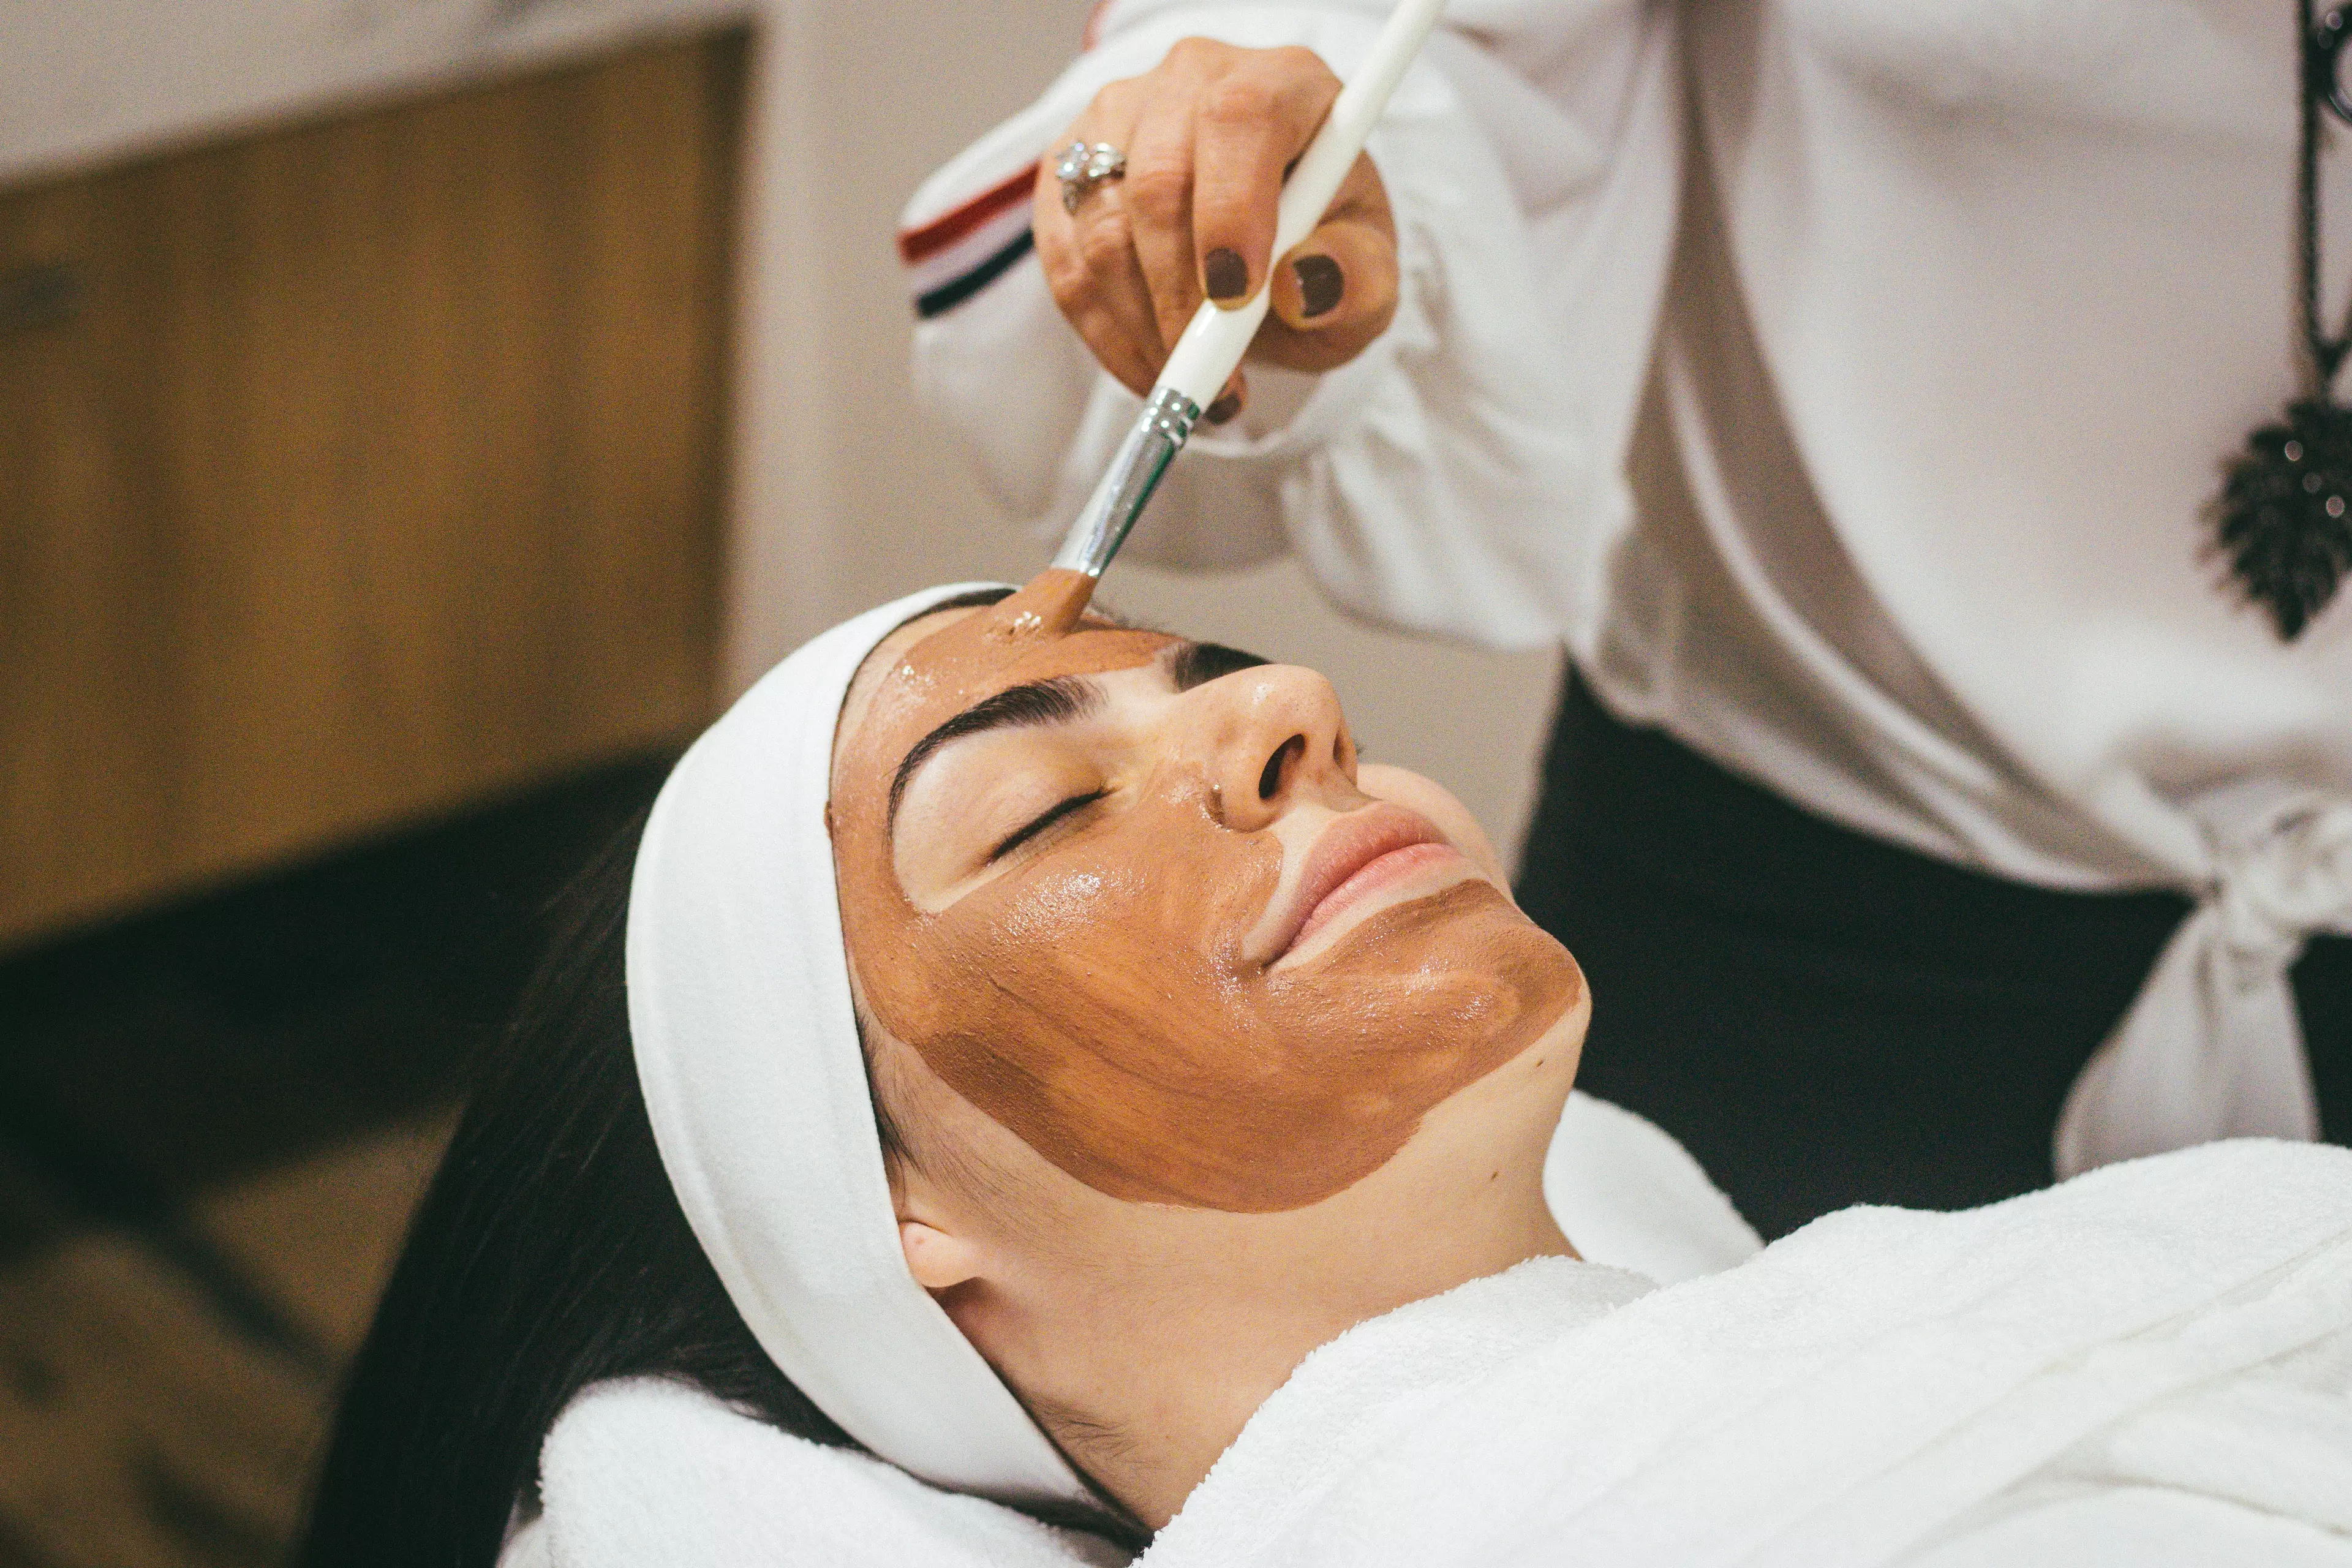 Beauty salons and spas will be able to offer facial treatments from Saturday 15th August (